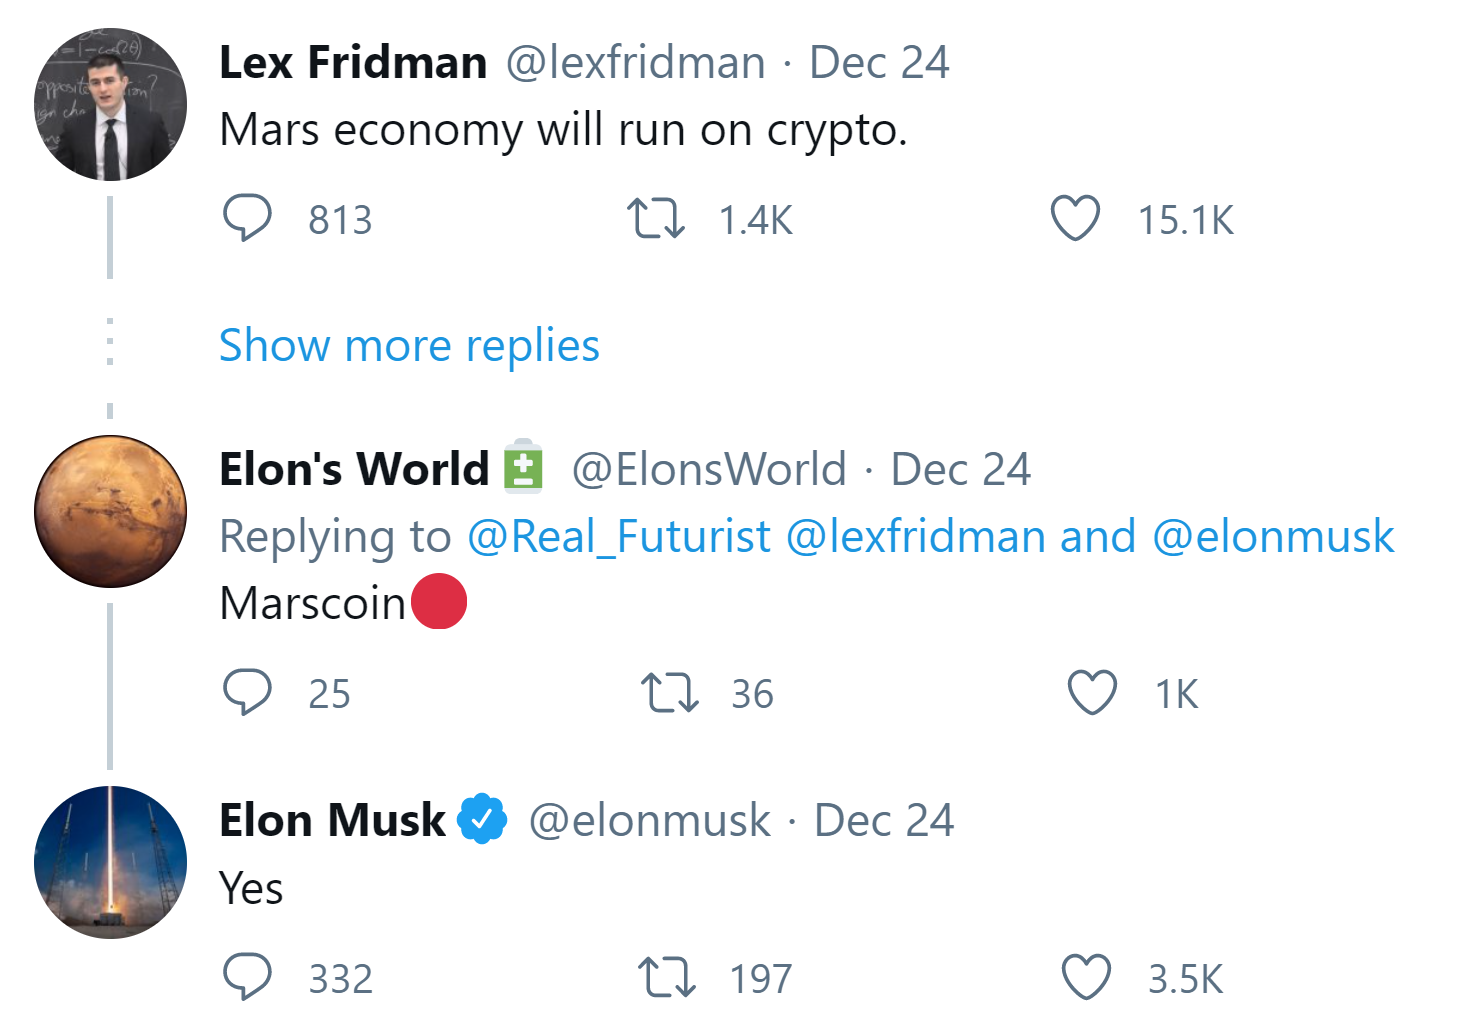 Elon Musk Endorses Cryptocurrency for Martian Economy